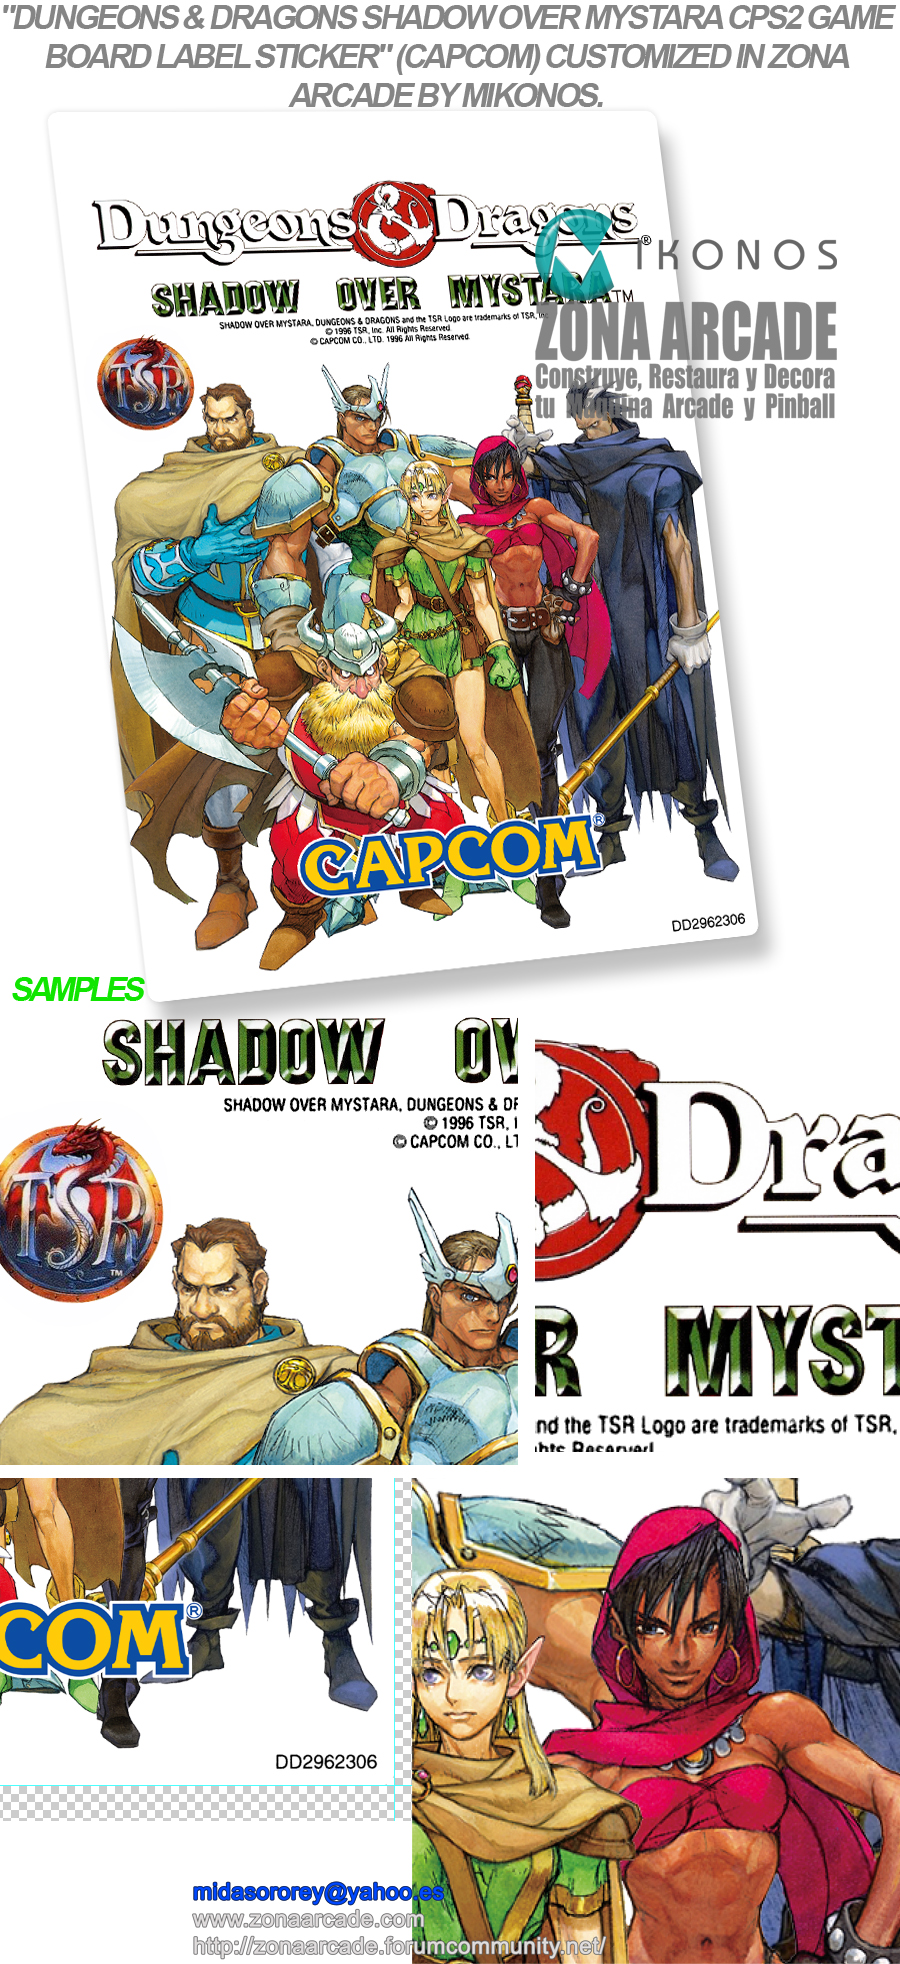 Dungeons-Dragons-Shadow-Over-Mystara-Custom-CPS2-Game-Board-Label-Sticker-Reproduced-Mikonos1